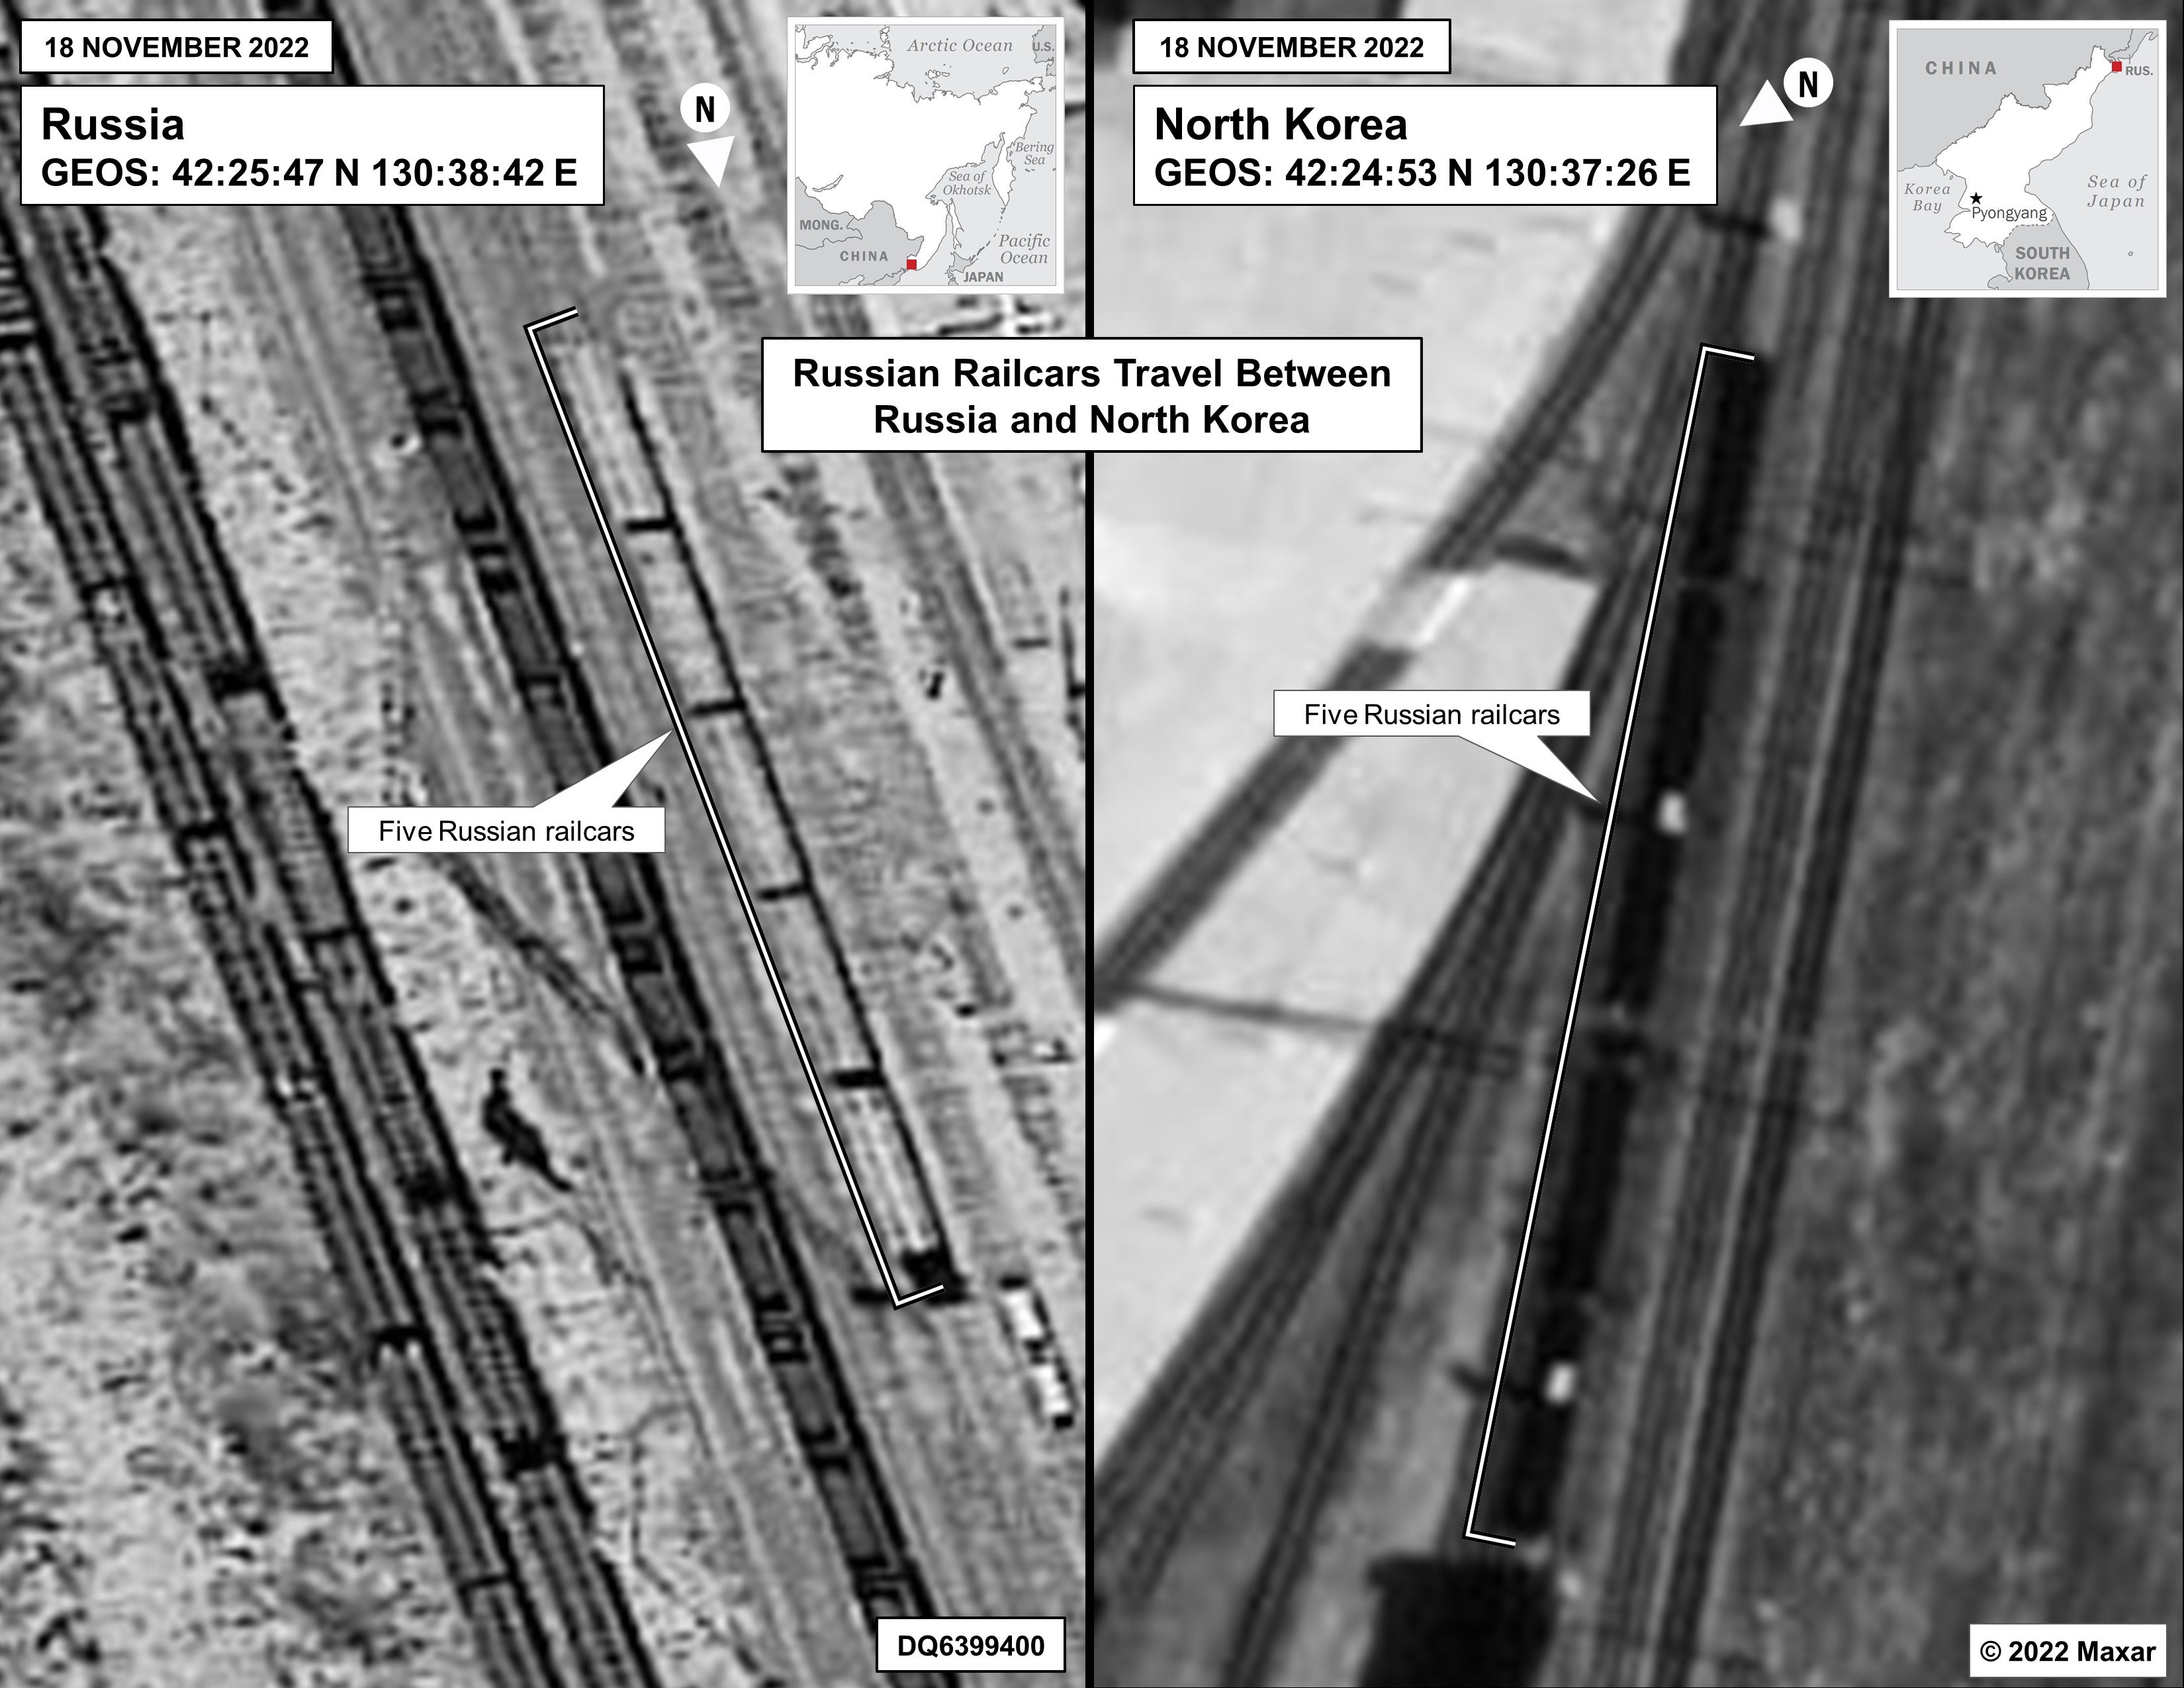 In this satellite photograph released by the National Security Council, Russian railcars are seen traveling between Russia and North Korea to receive arms bound for use by the Wagner Group in Ukraine